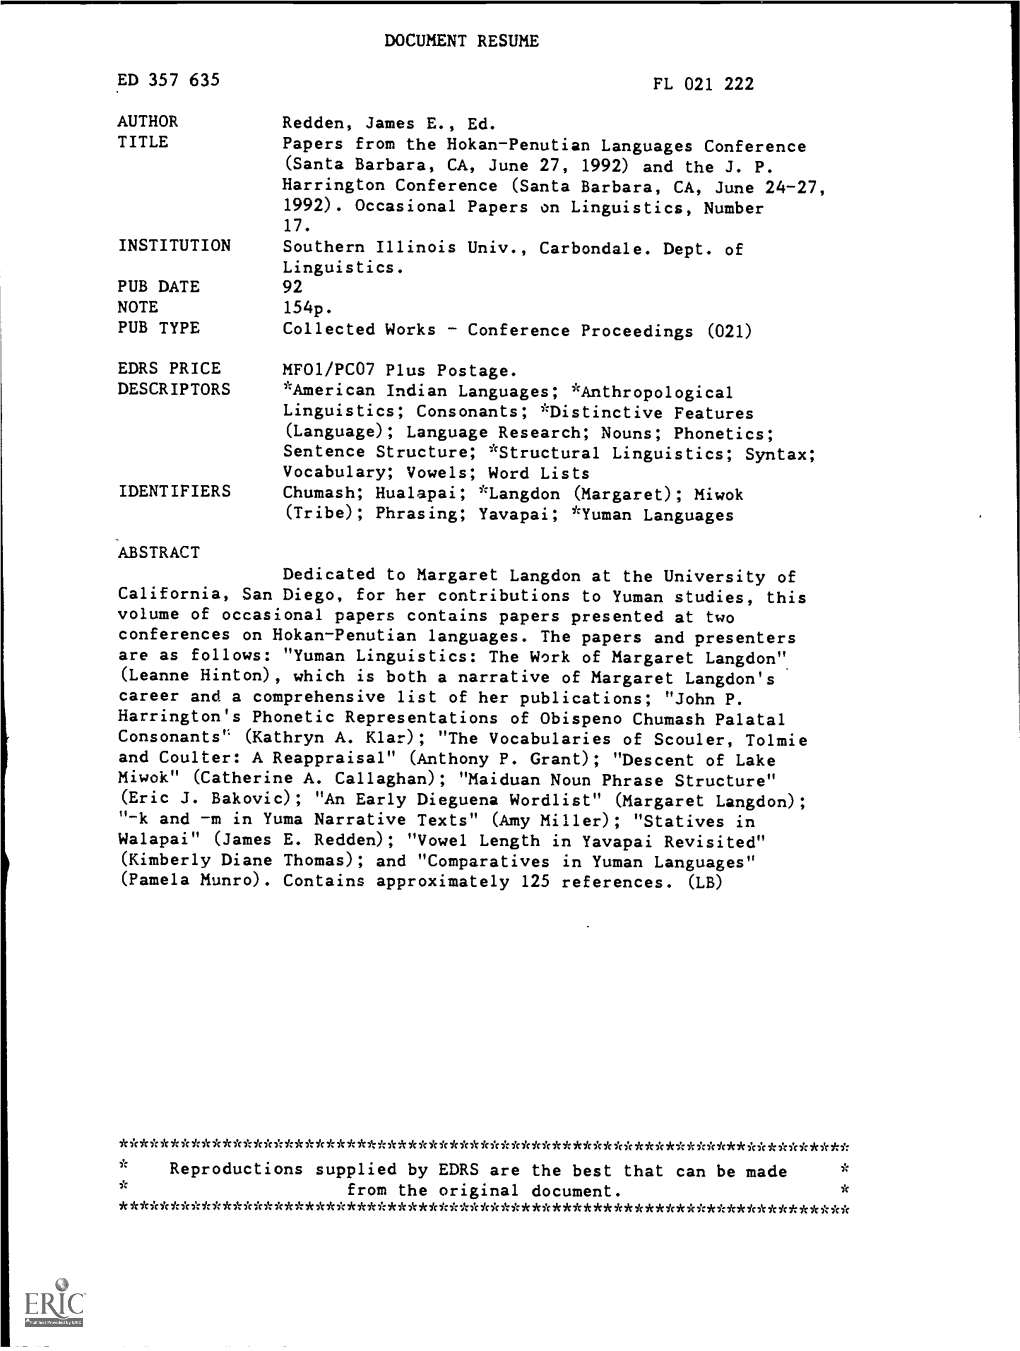 DOCUMENT RESUME ED 357 635 FL 021 222 AUTHOR Redden, James E., Ed. TITLE Papers from the Hokan-Penutian Languages Conference